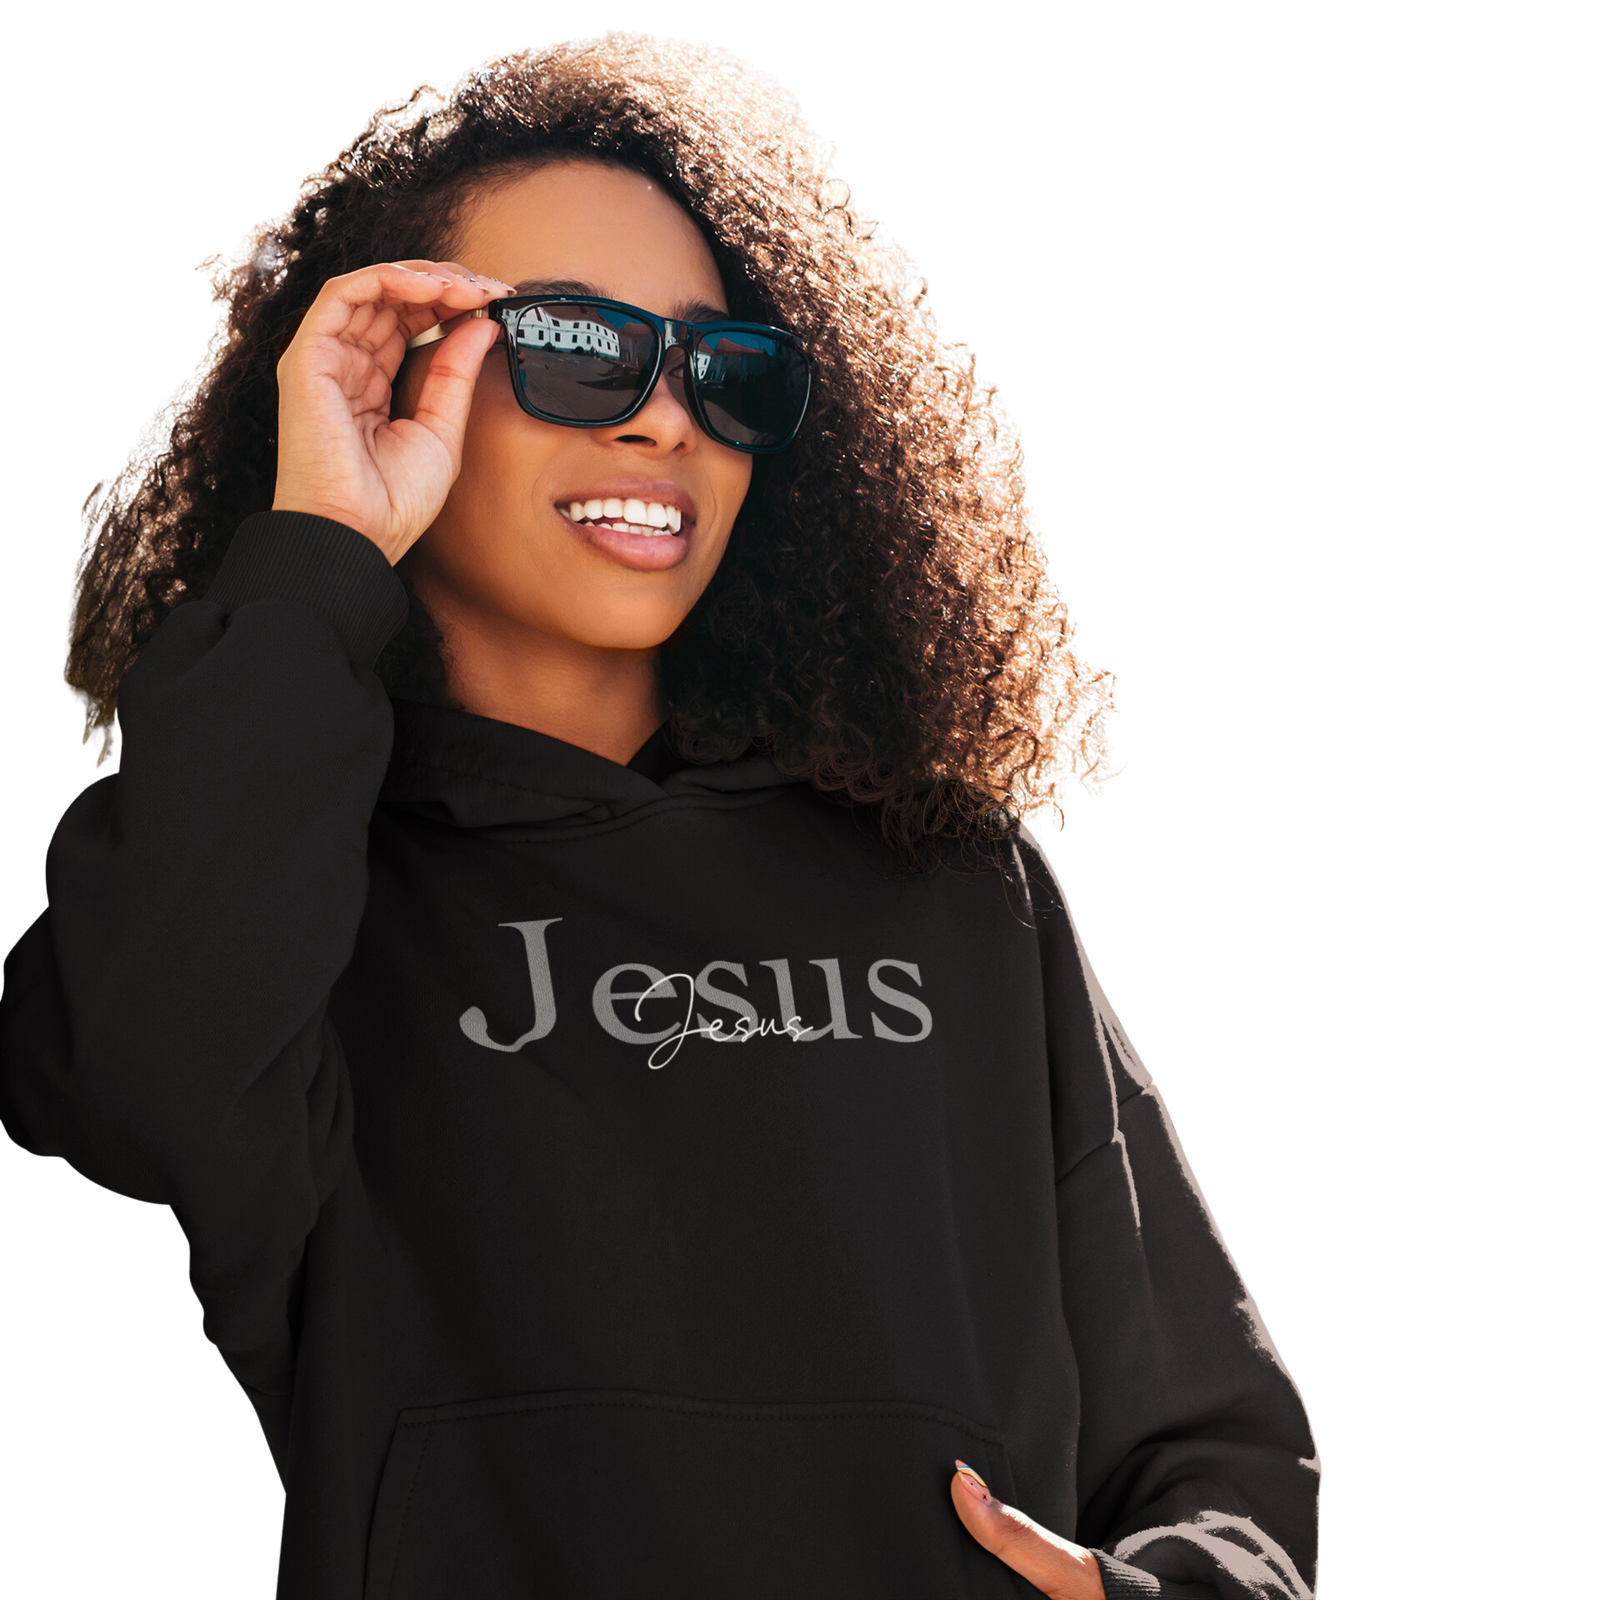 Jesus- Hooded sweatshirt (Available in more colors)